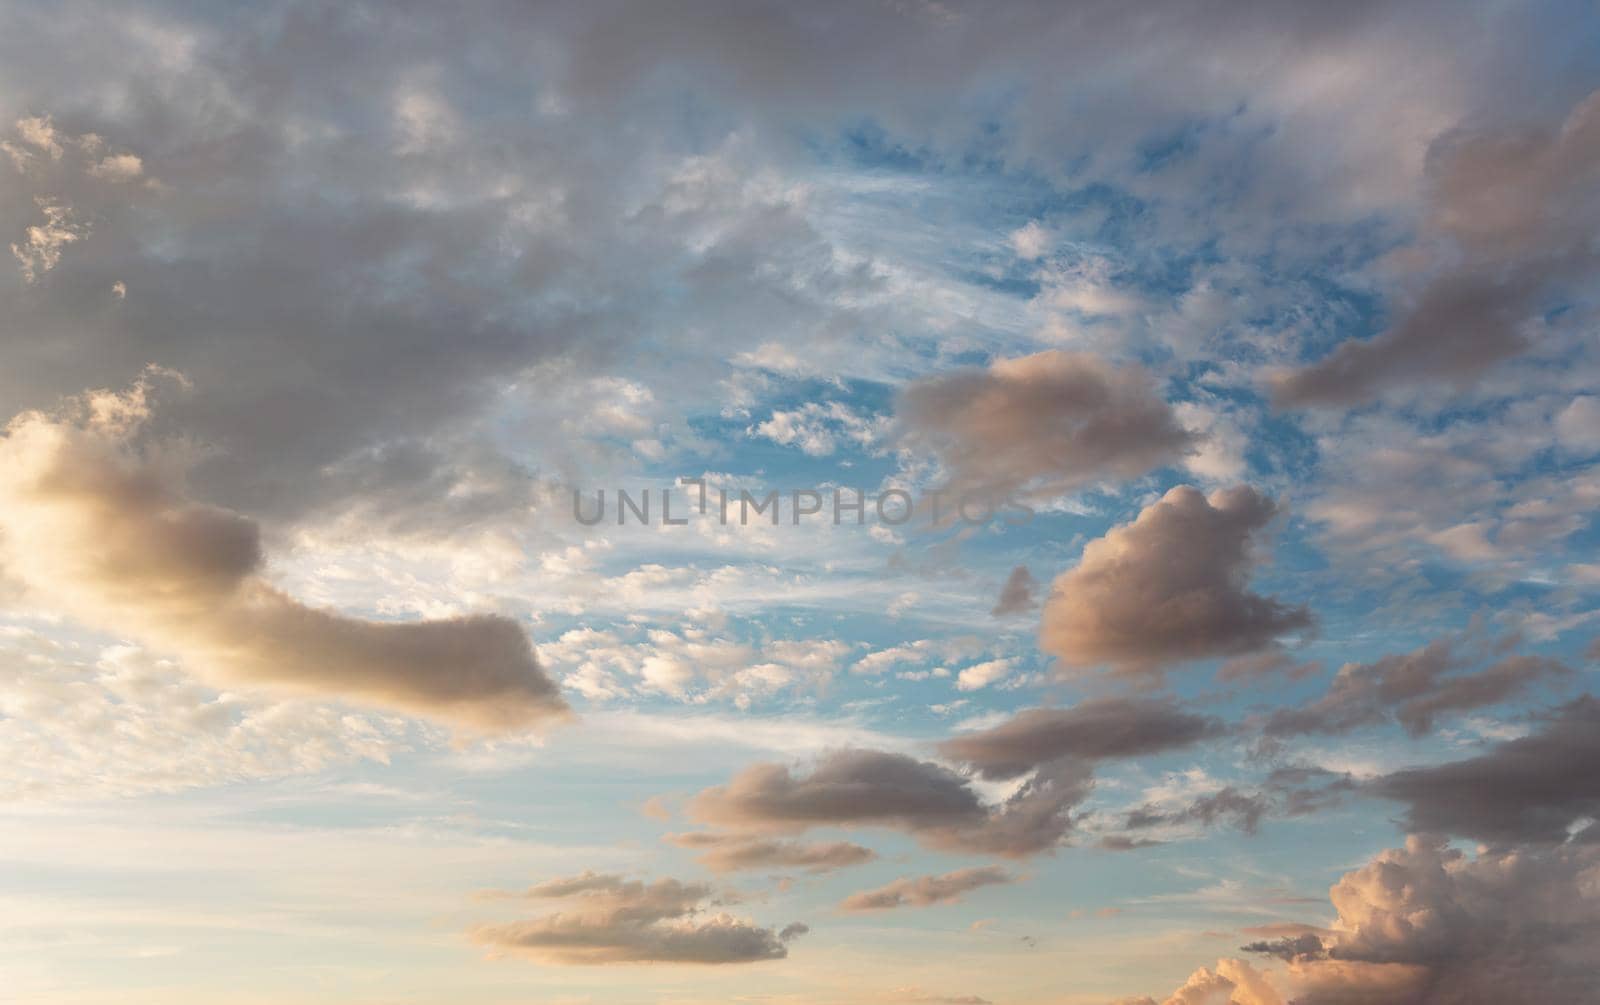 Evening sky with some yellow, white, grey and dark clouds by Ivanko